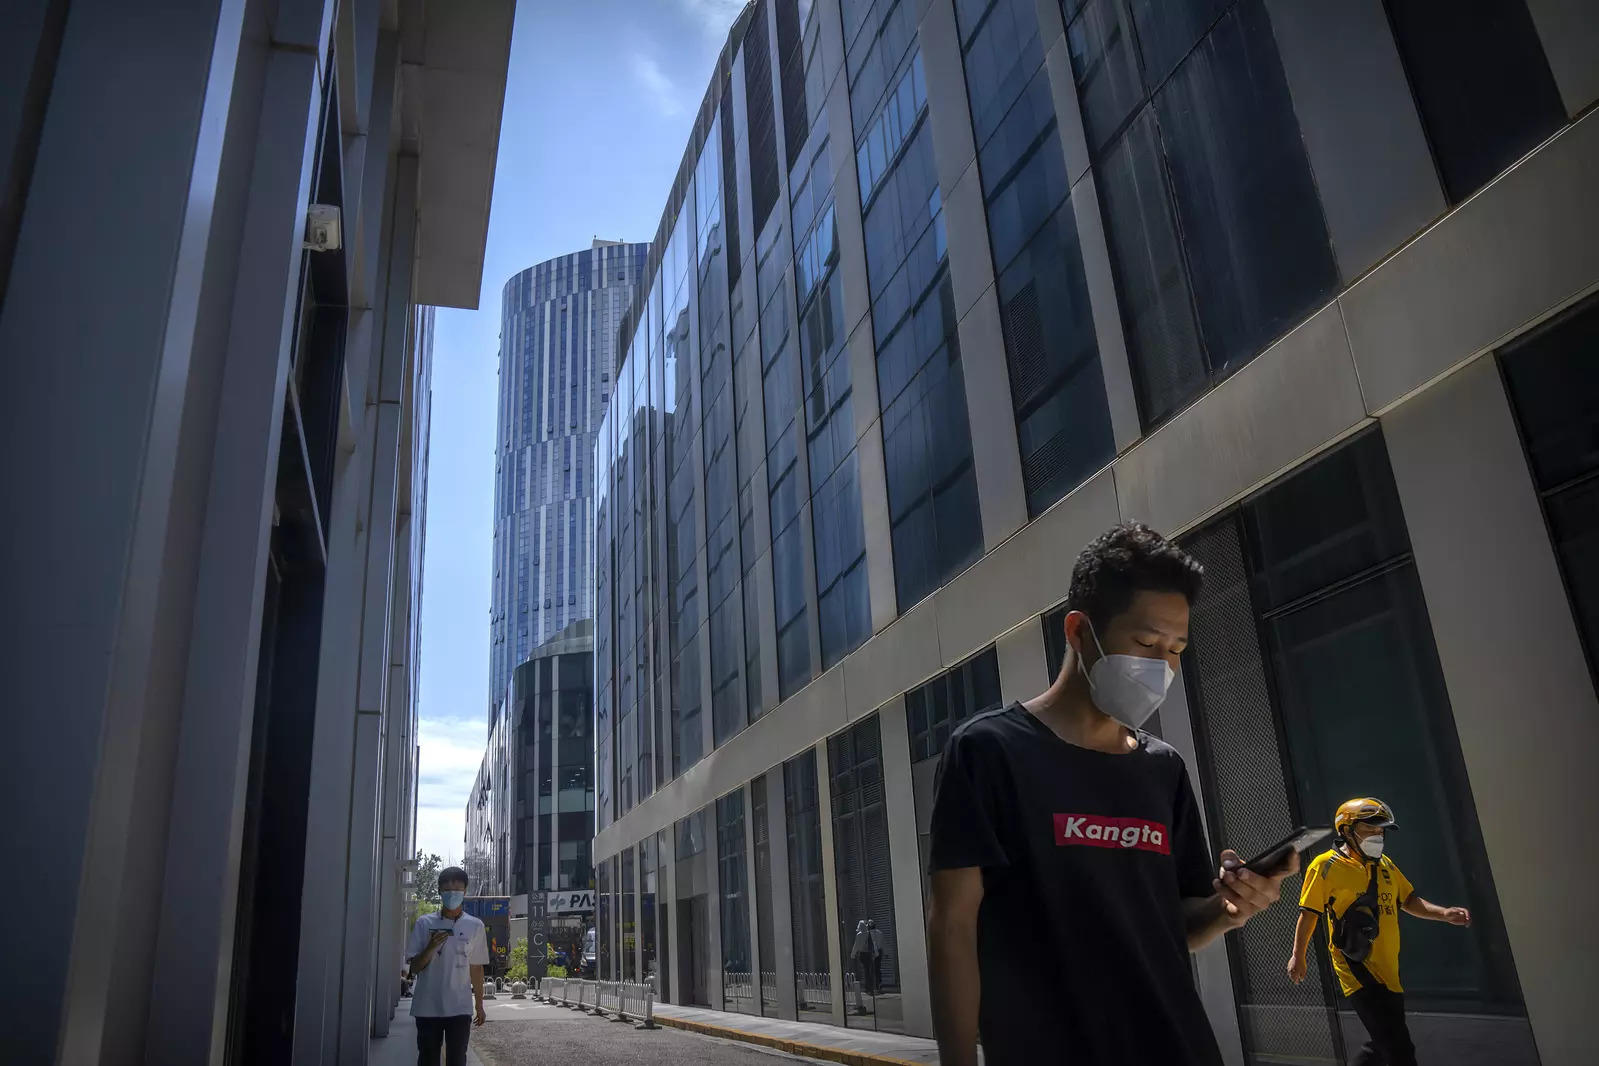 Delivery drivers wearing face masks walk through a shopping and office complex in Beijing